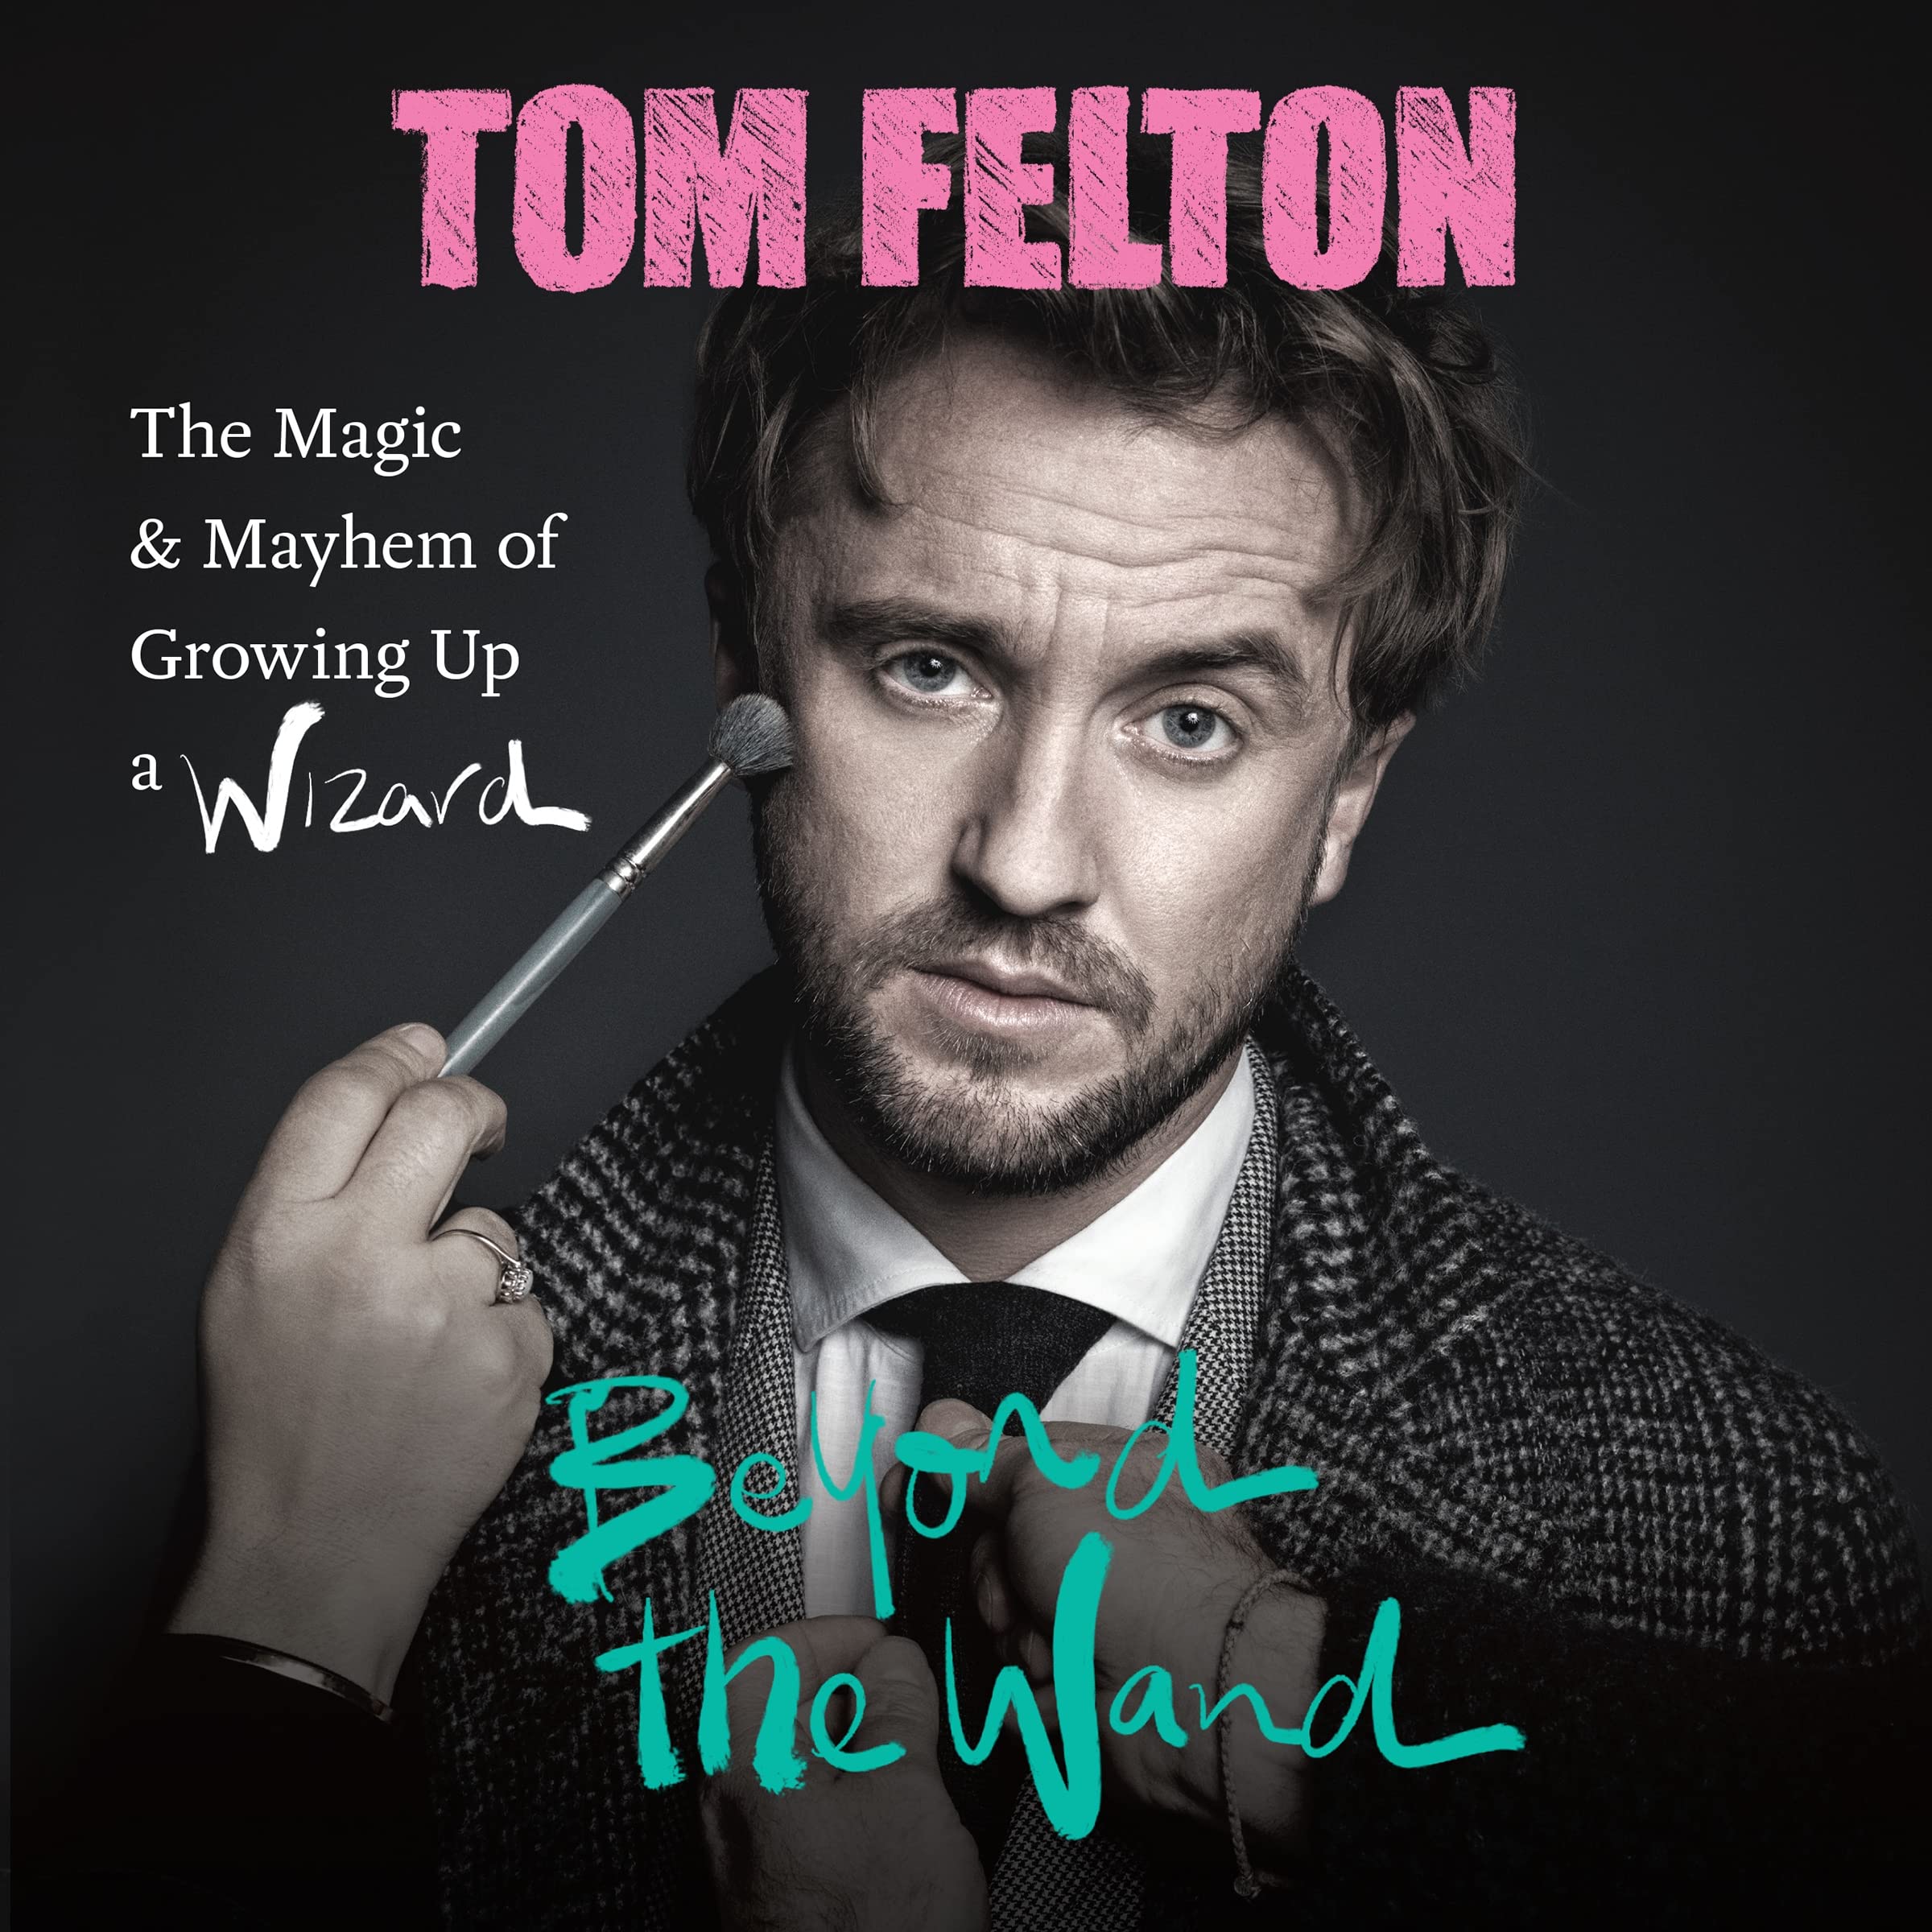 Beyond the Wand: The Magic and Mayhem of Growing Up a Wizard (Audio CD)